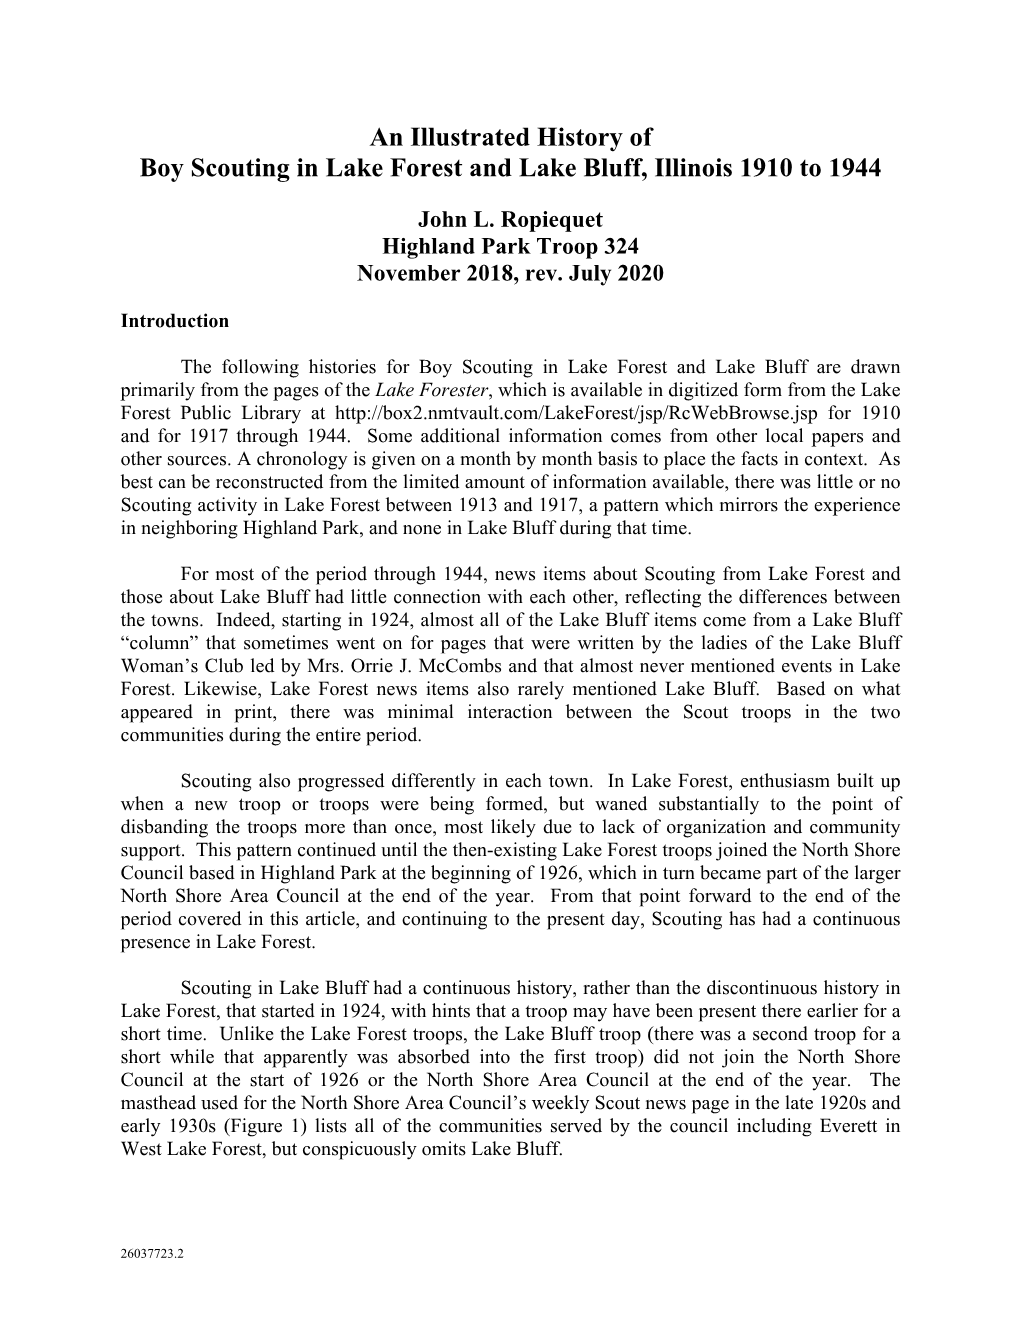 Boy Scouting in Lake Forest and Lake Bluff, Illinois 1910 to 1944